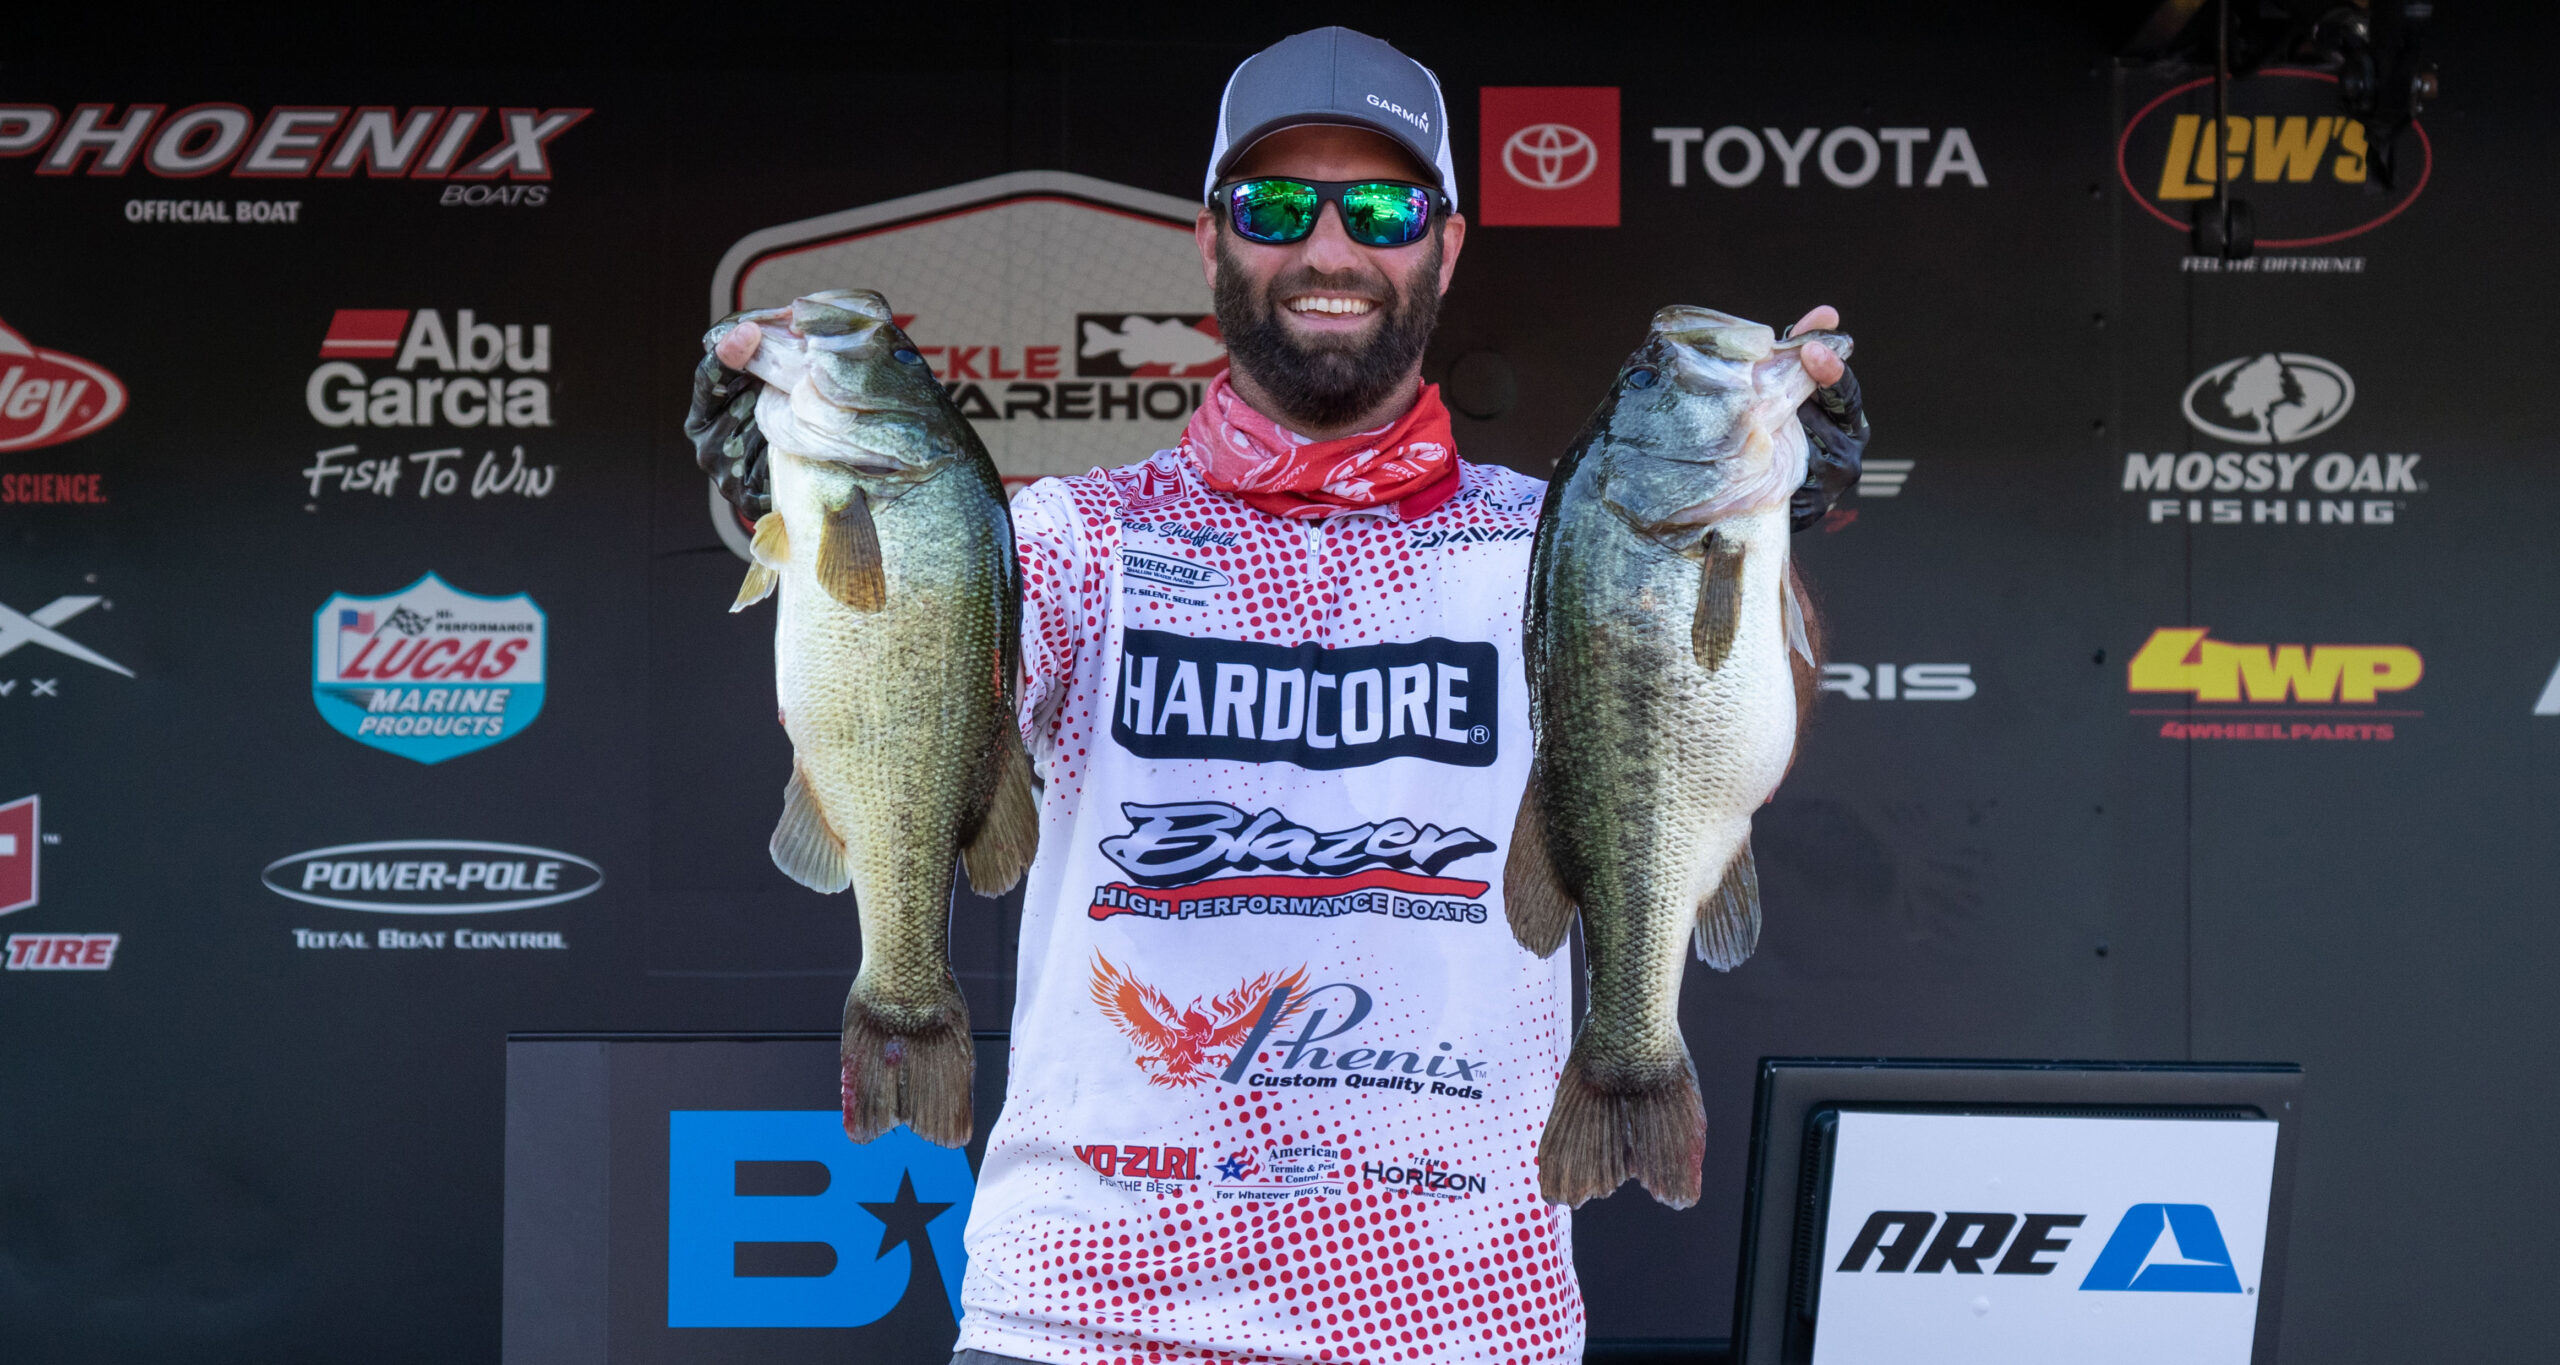 Spencer Shuffield Takes Early Lead on Day 1 of Tackle Warehouse Pro Circuit  Stop 4 - Major League Fishing